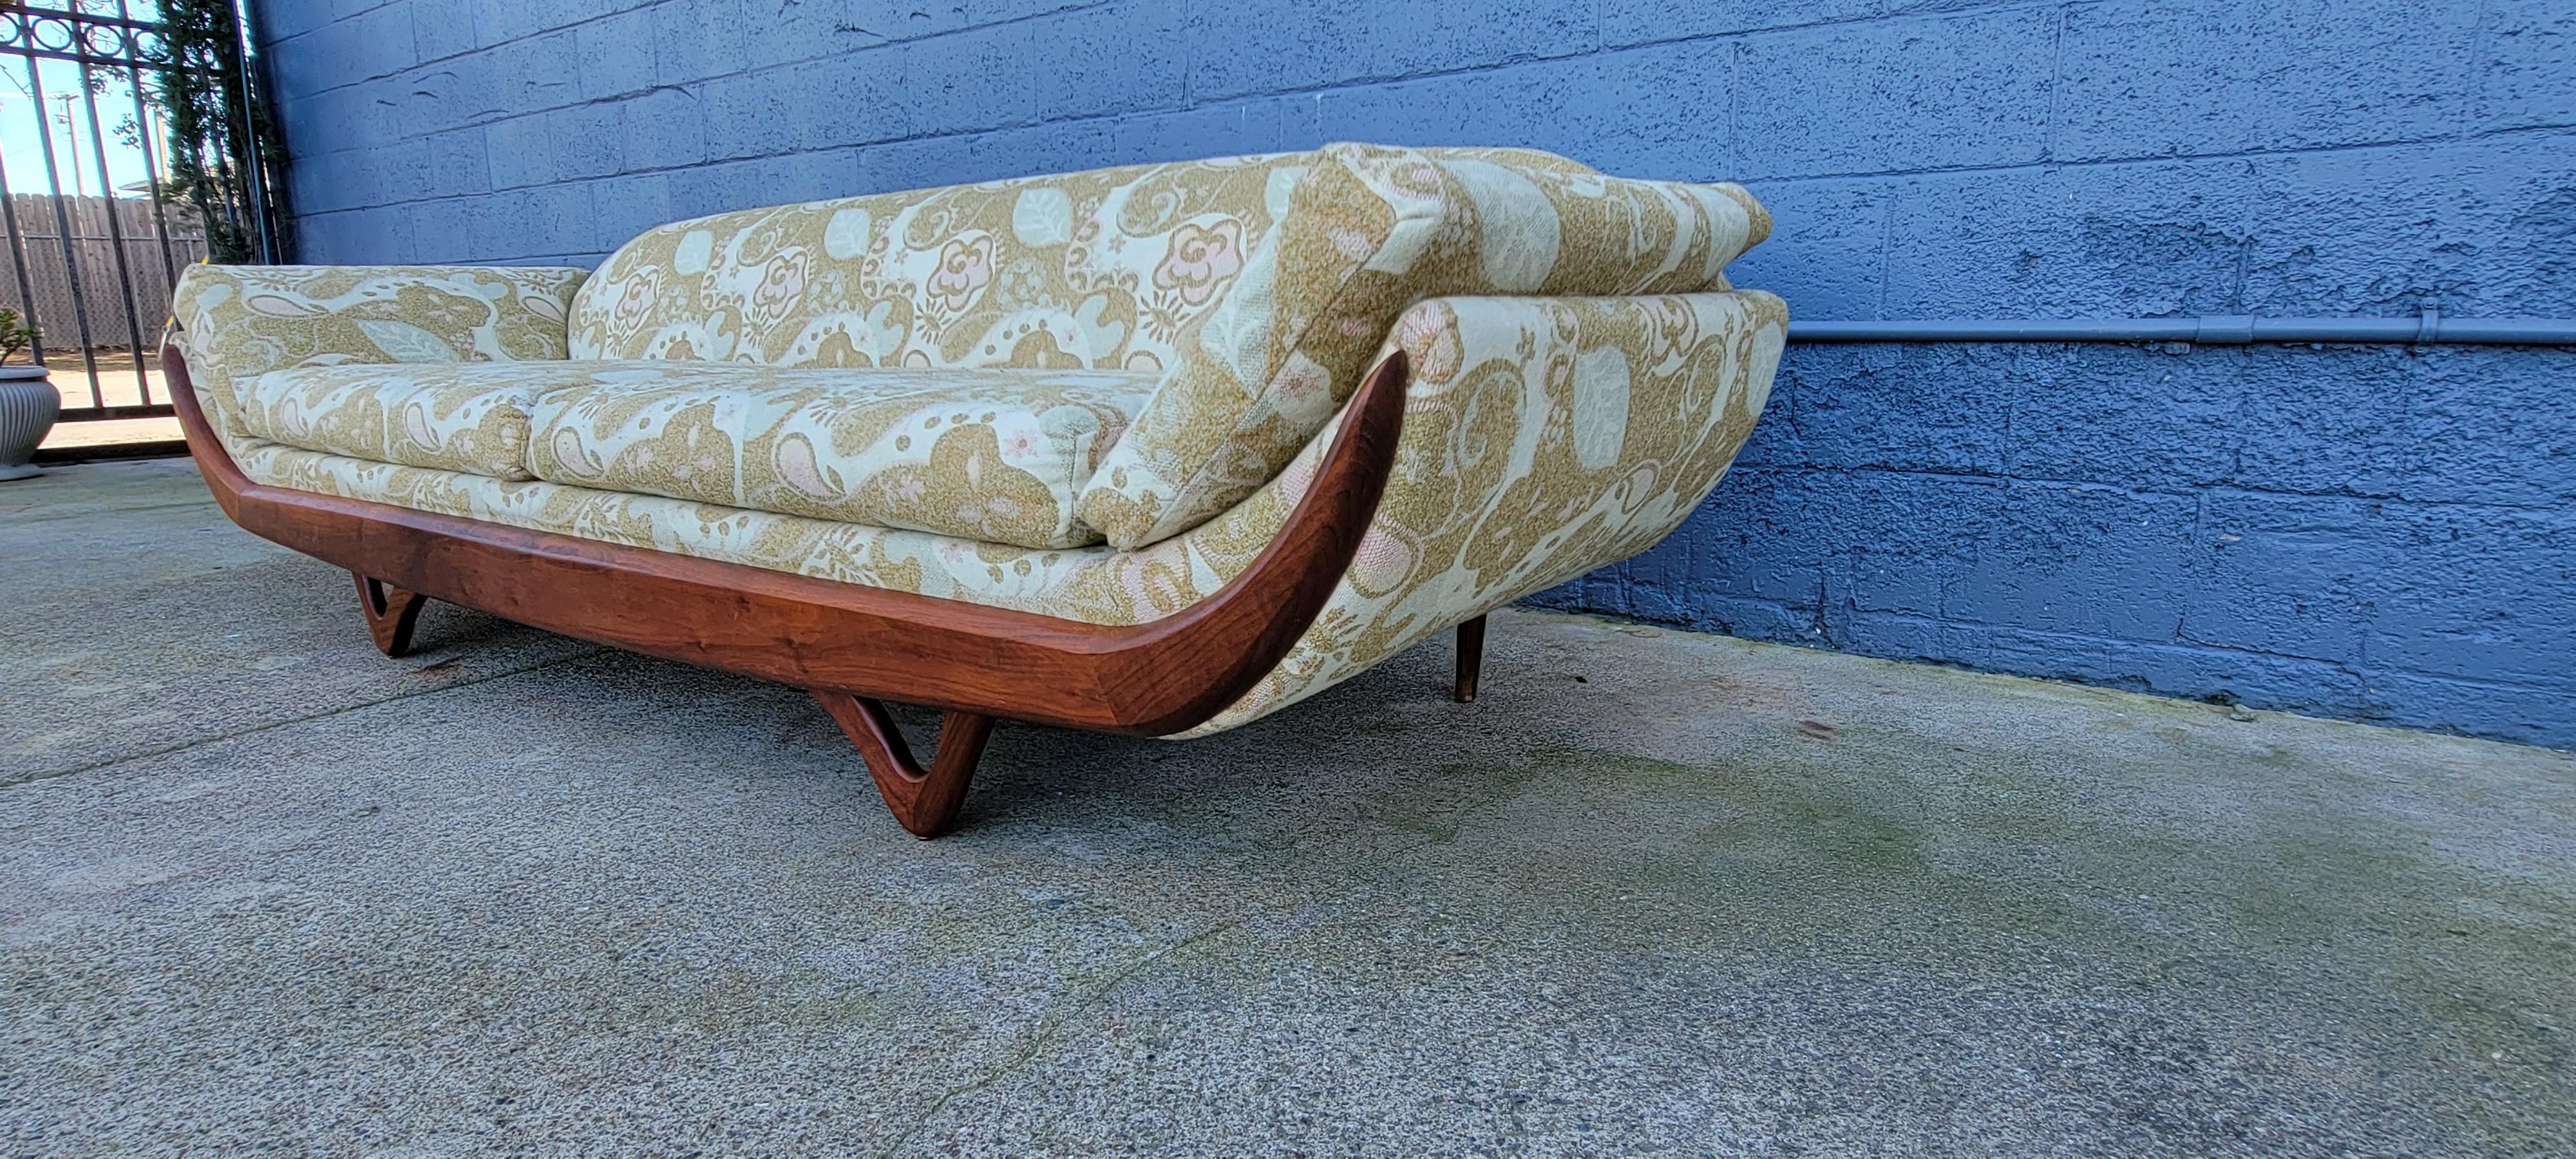 American Gondola Sofa by Tempo Manner of Adrian Pearsall